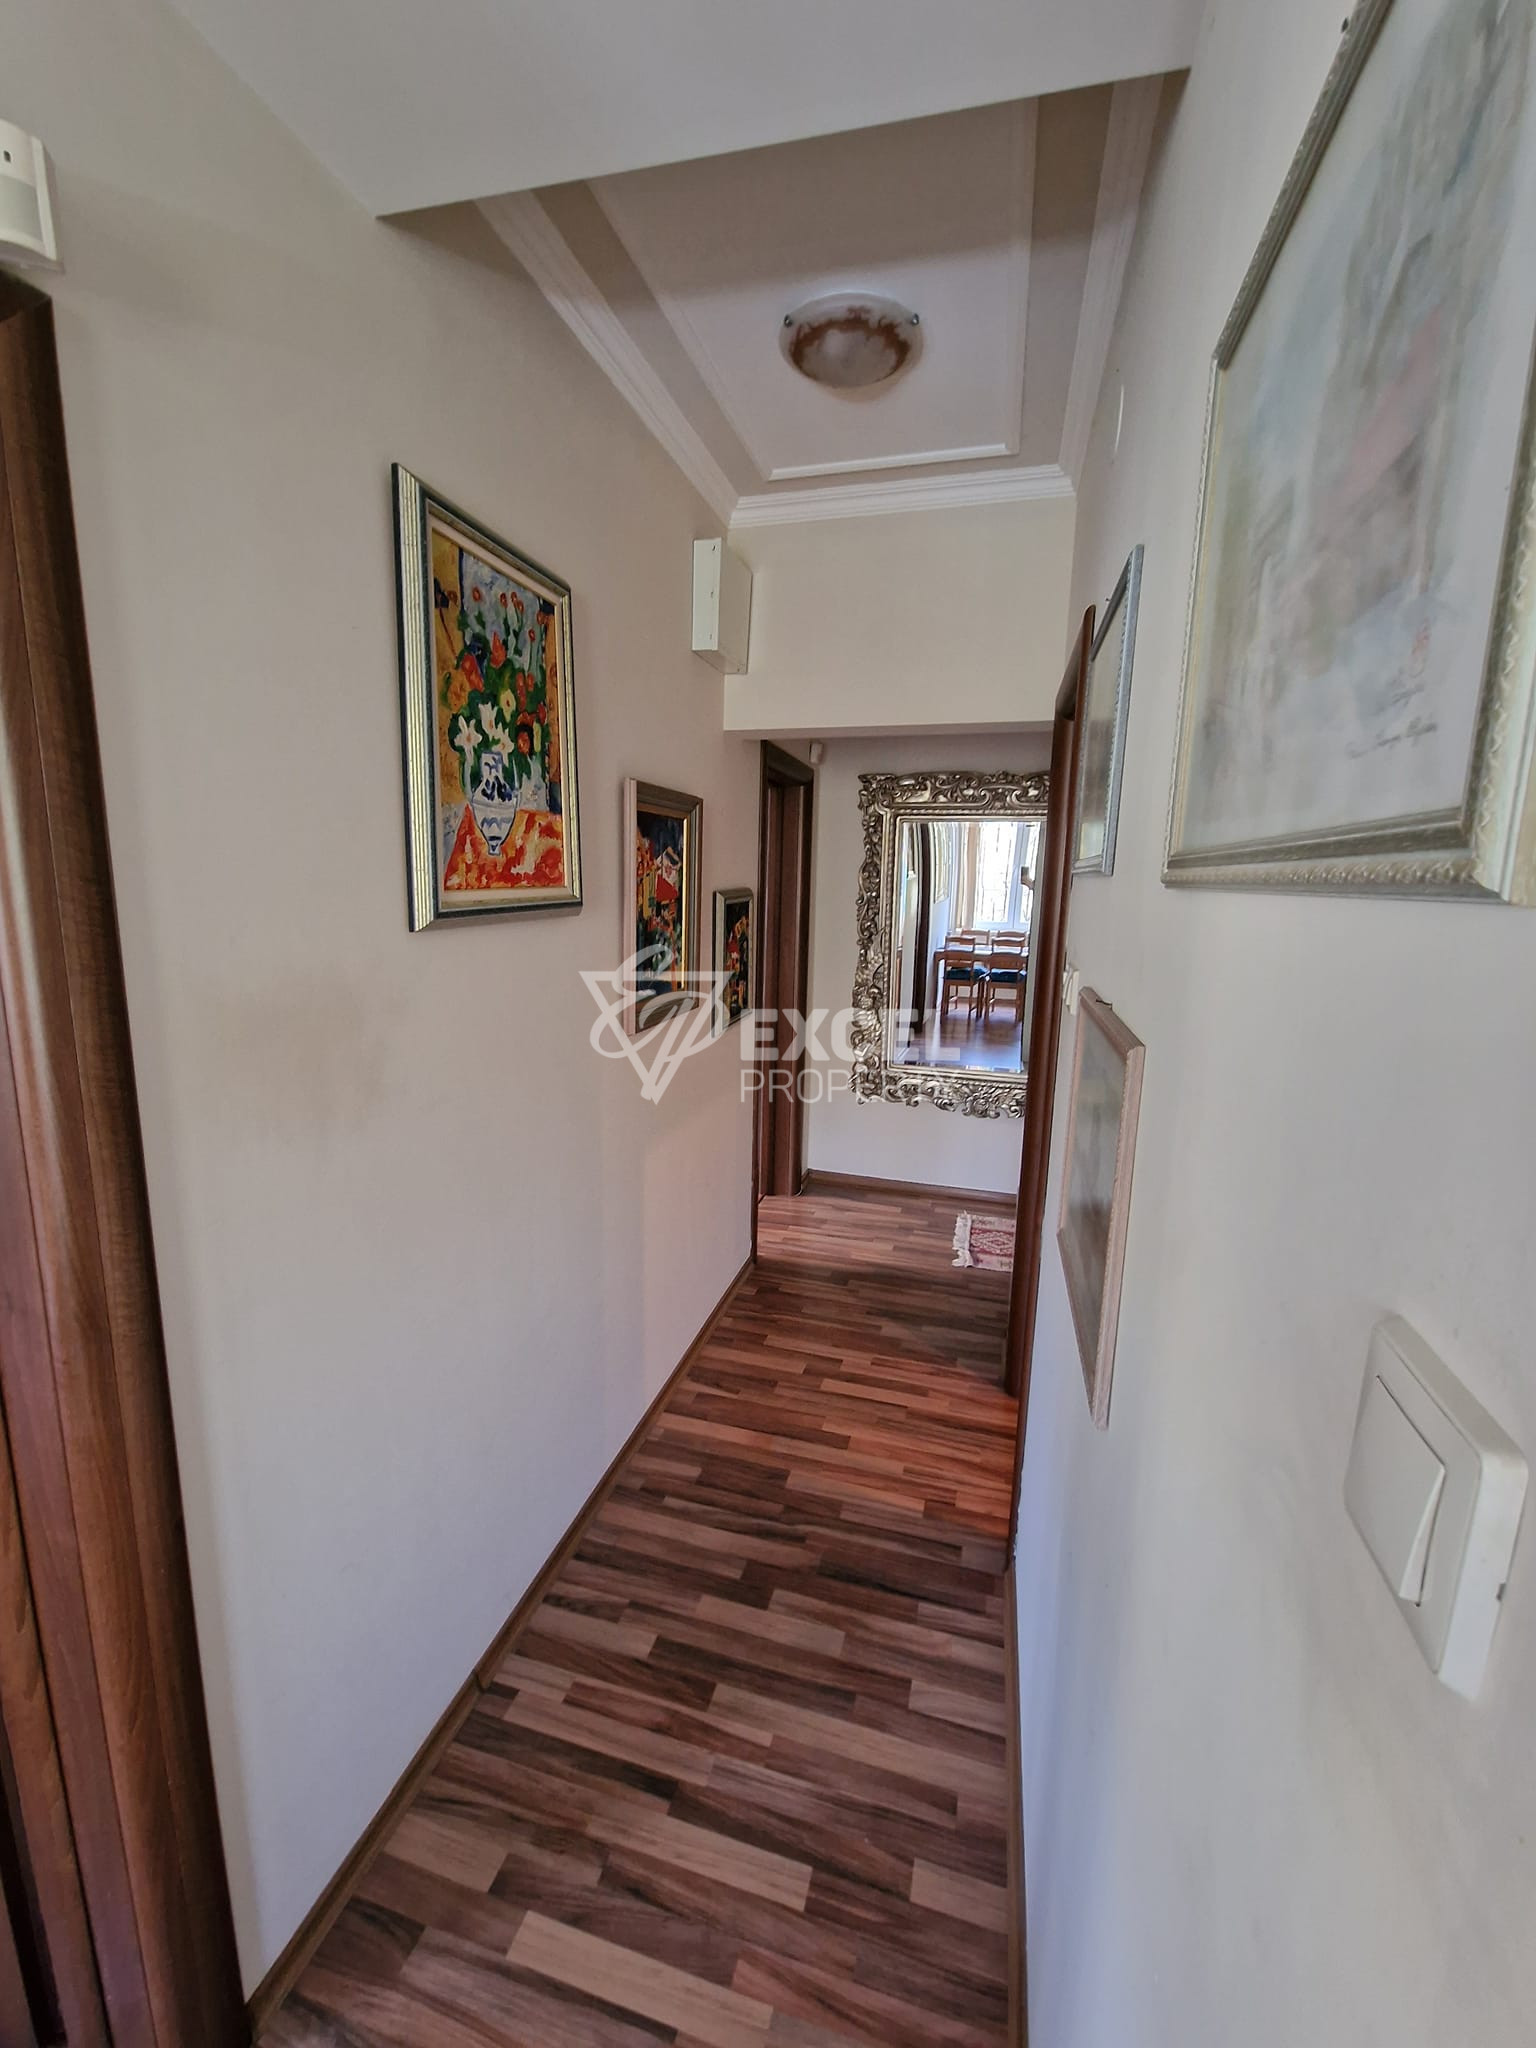 Furnished one bedroom apartment for rent in the heart of Lozenets, Vishneva Street